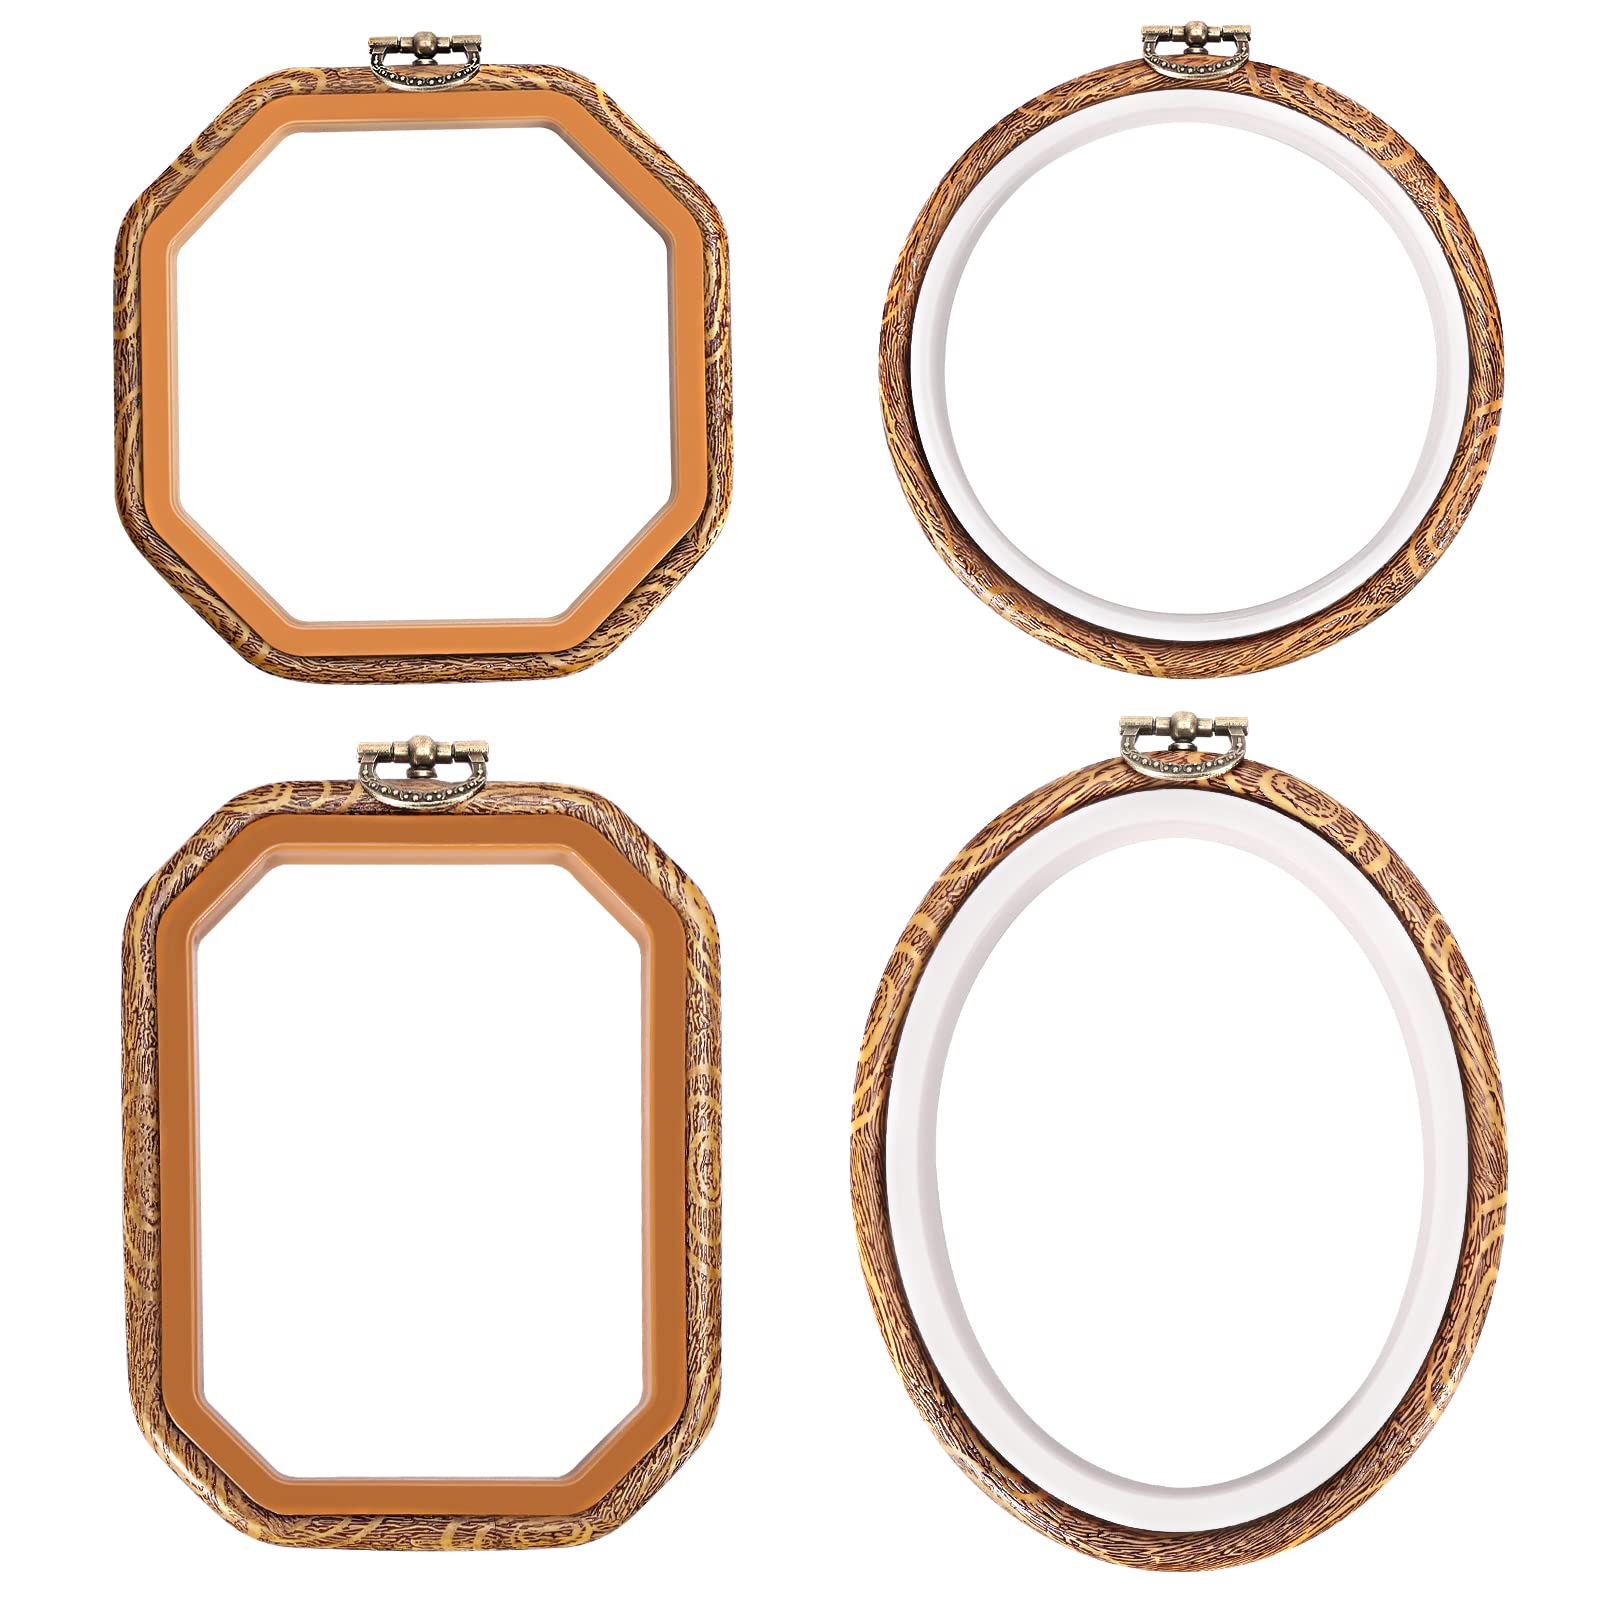 joybest 4 pieces 6 inch round embroidery hoops display frame circle, cross  stitch hoop ring imitated